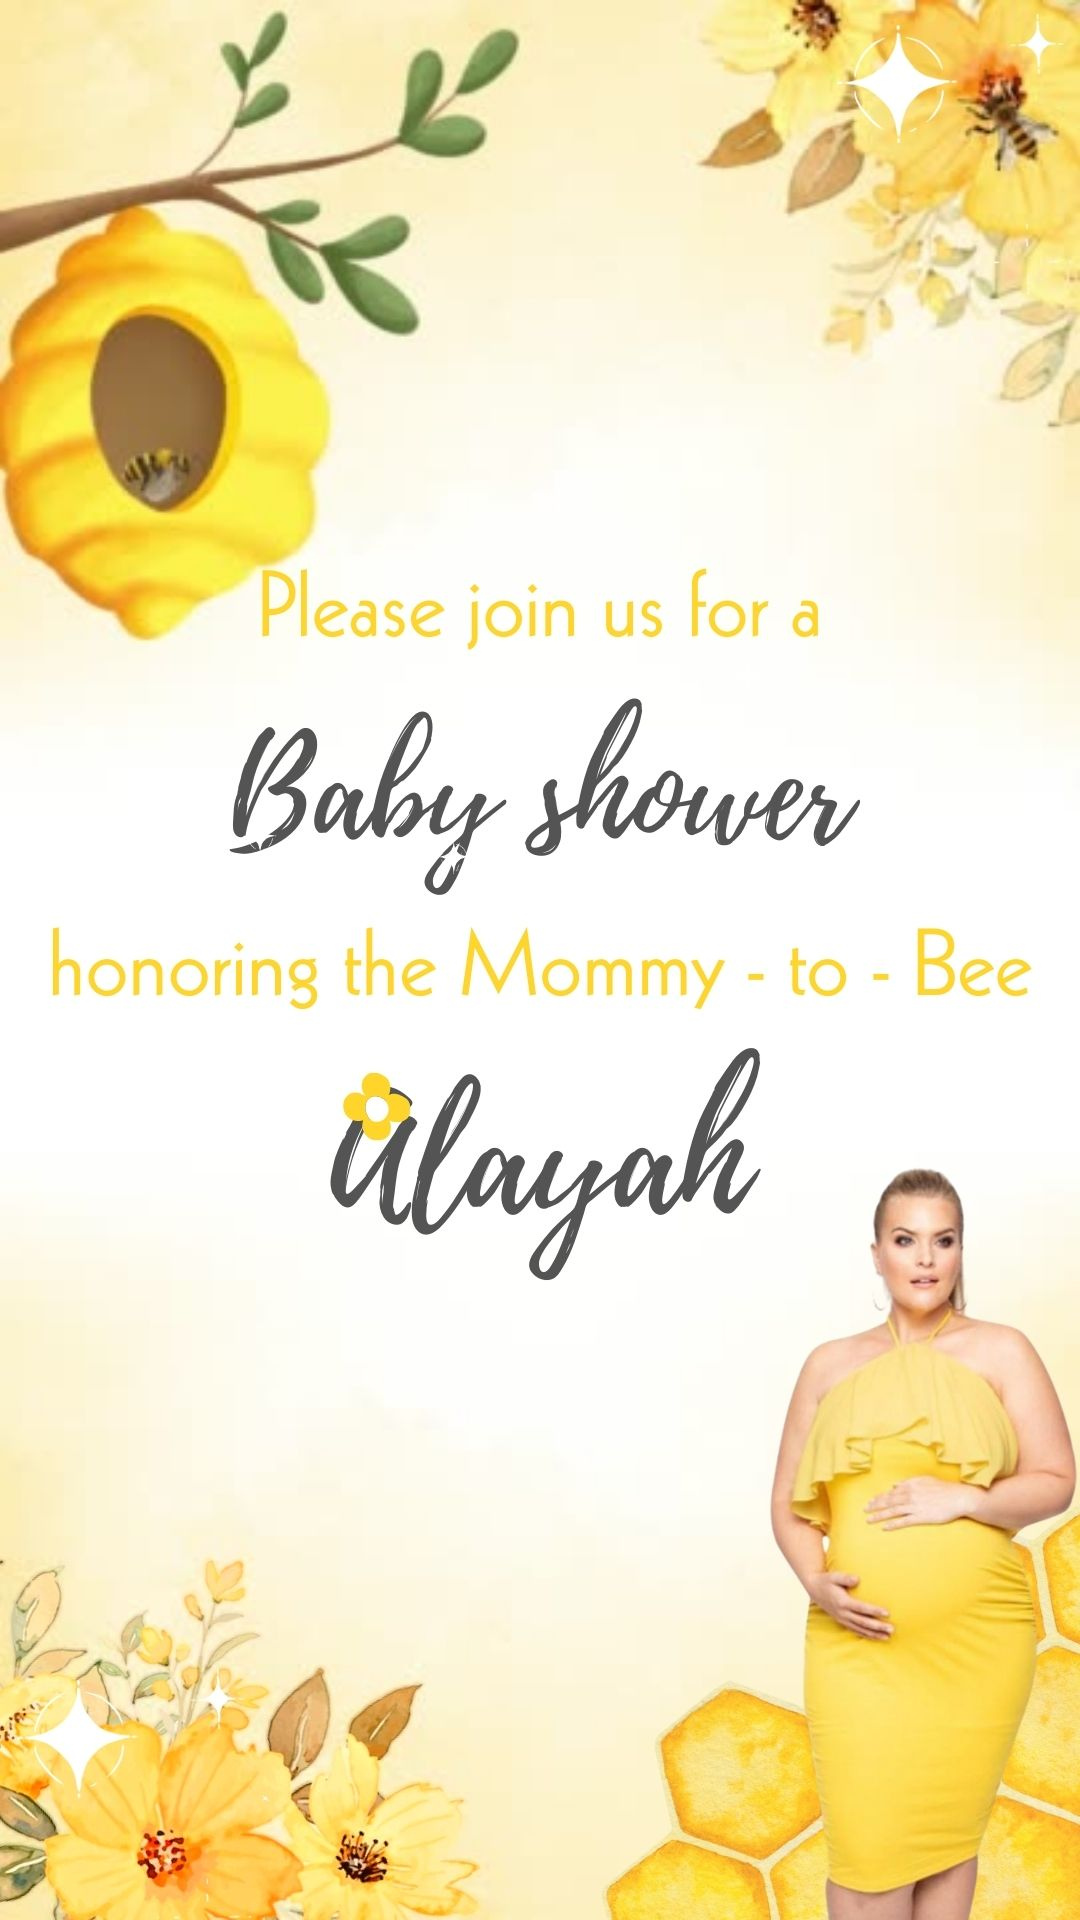 Bee Baby Shower Video Invitation - Bumble Bee Shower Invite - Bee Shower Theme Invite